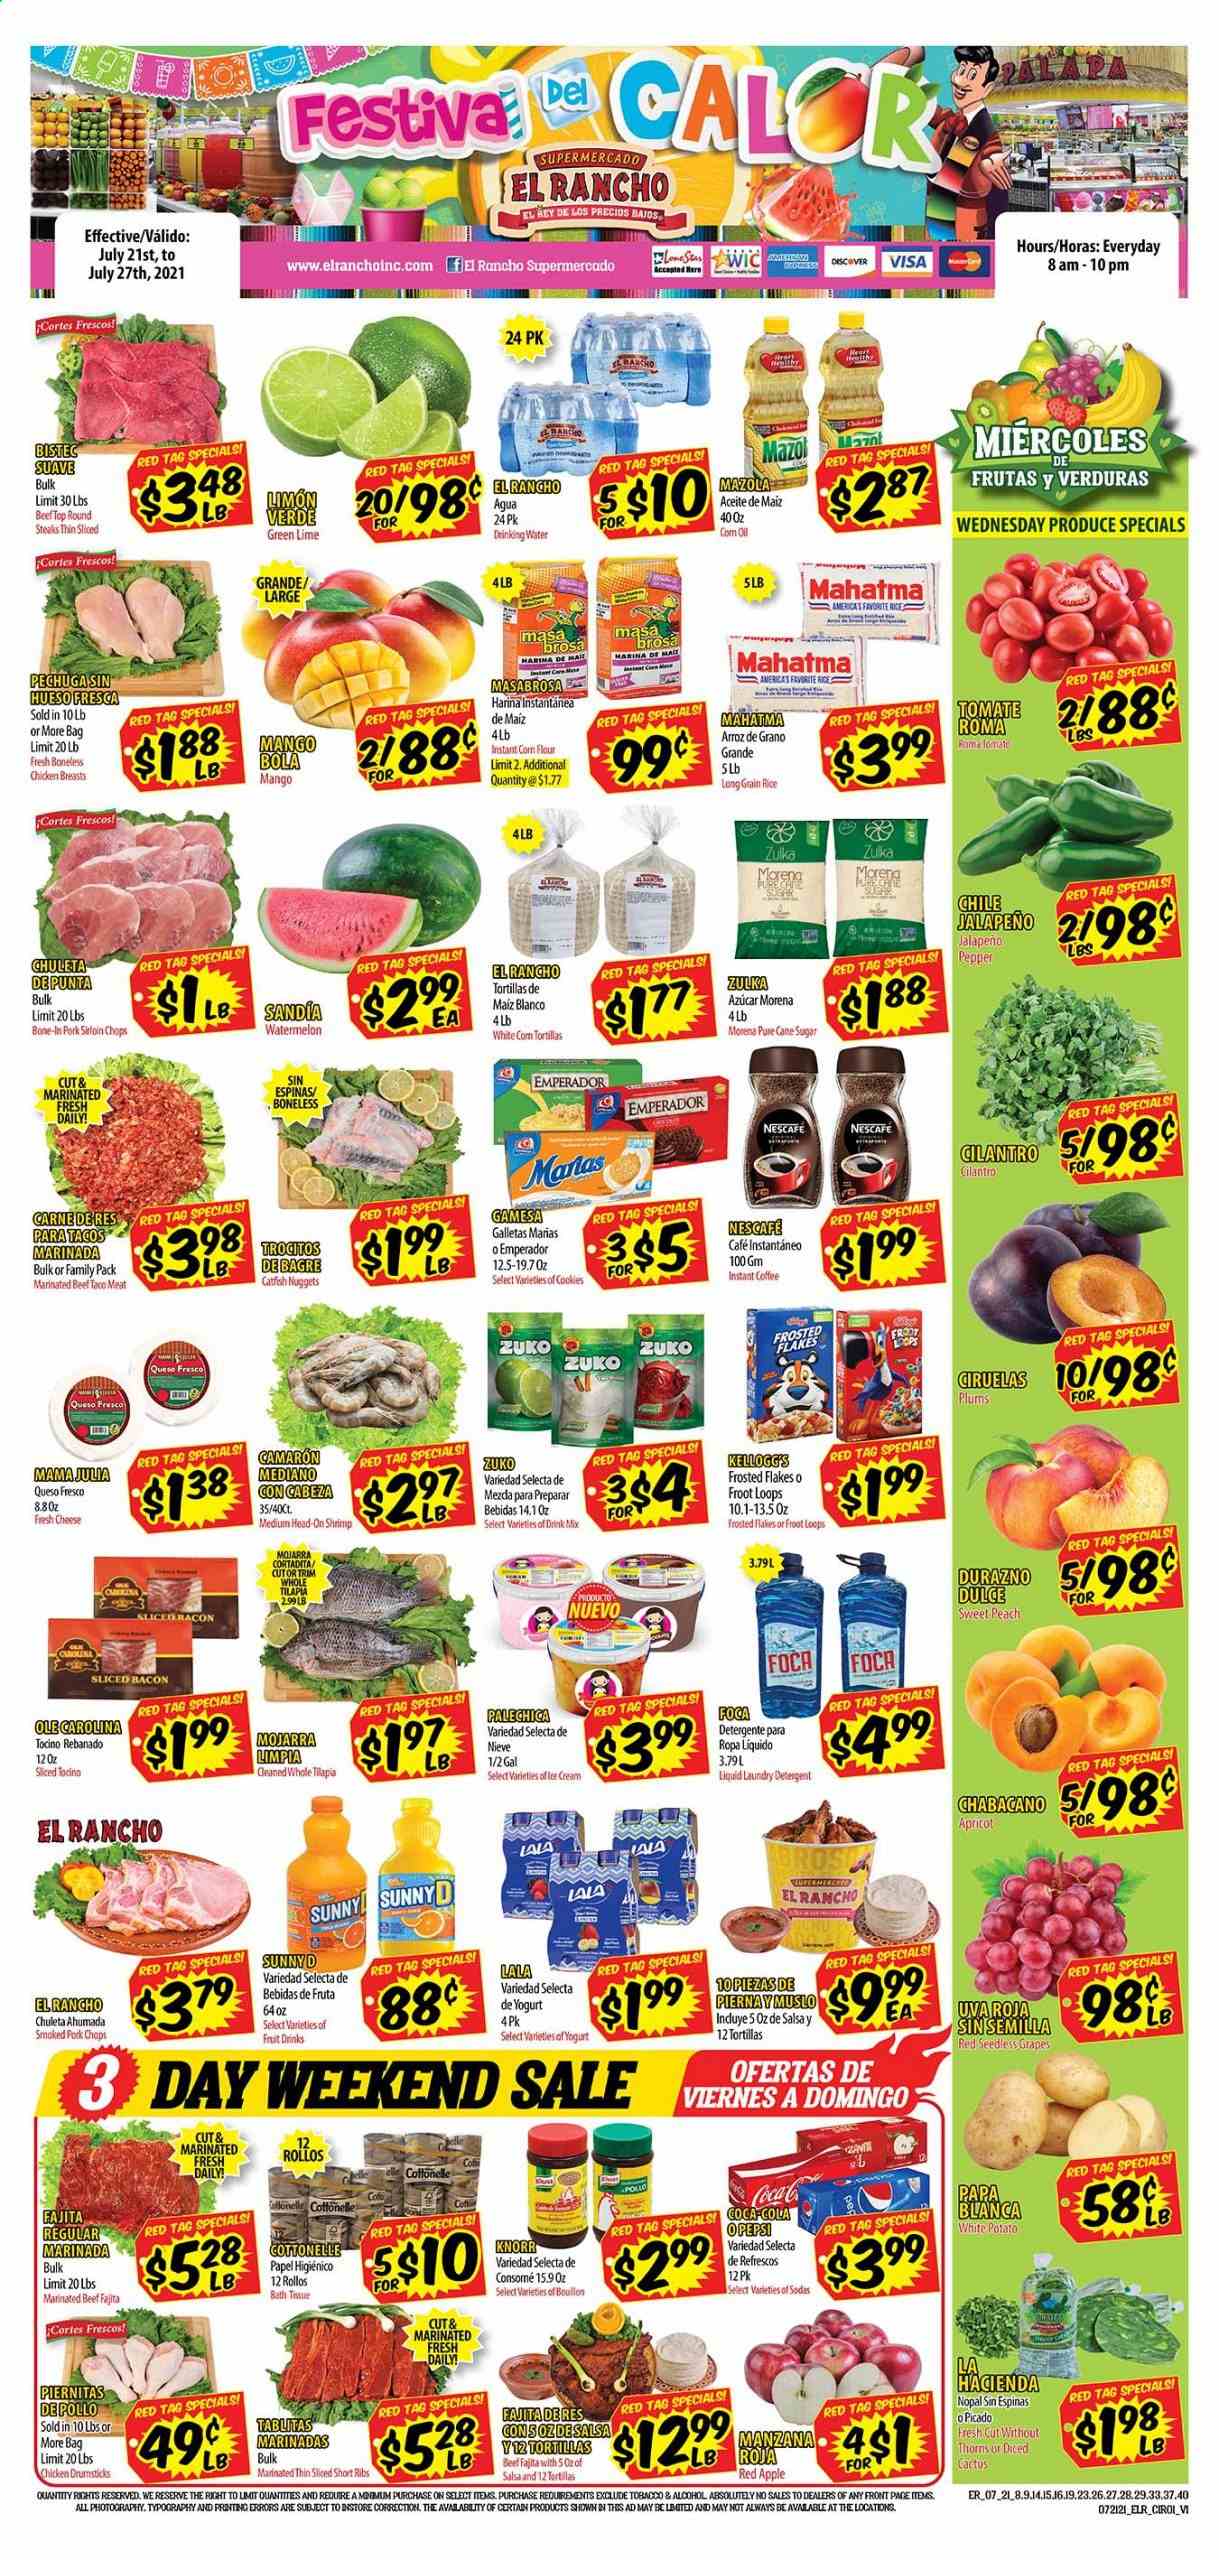 thumbnail - El Rancho Flyer - 07/21/2021 - 07/27/2021 - Sales products - seedless grapes, plums, tortillas, corn, jalapeño, grapes, mango, watermelon, tilapia, nuggets, Knorr, fajita, bacon, queso fresco, cheese, yoghurt, Rama, cane sugar, sugar, corn flour, Frosted Flakes, rice, pepper, salsa, Nescafé, alcohol, chicken breasts, chicken drumsticks, steak, marinated beef. Page 1.